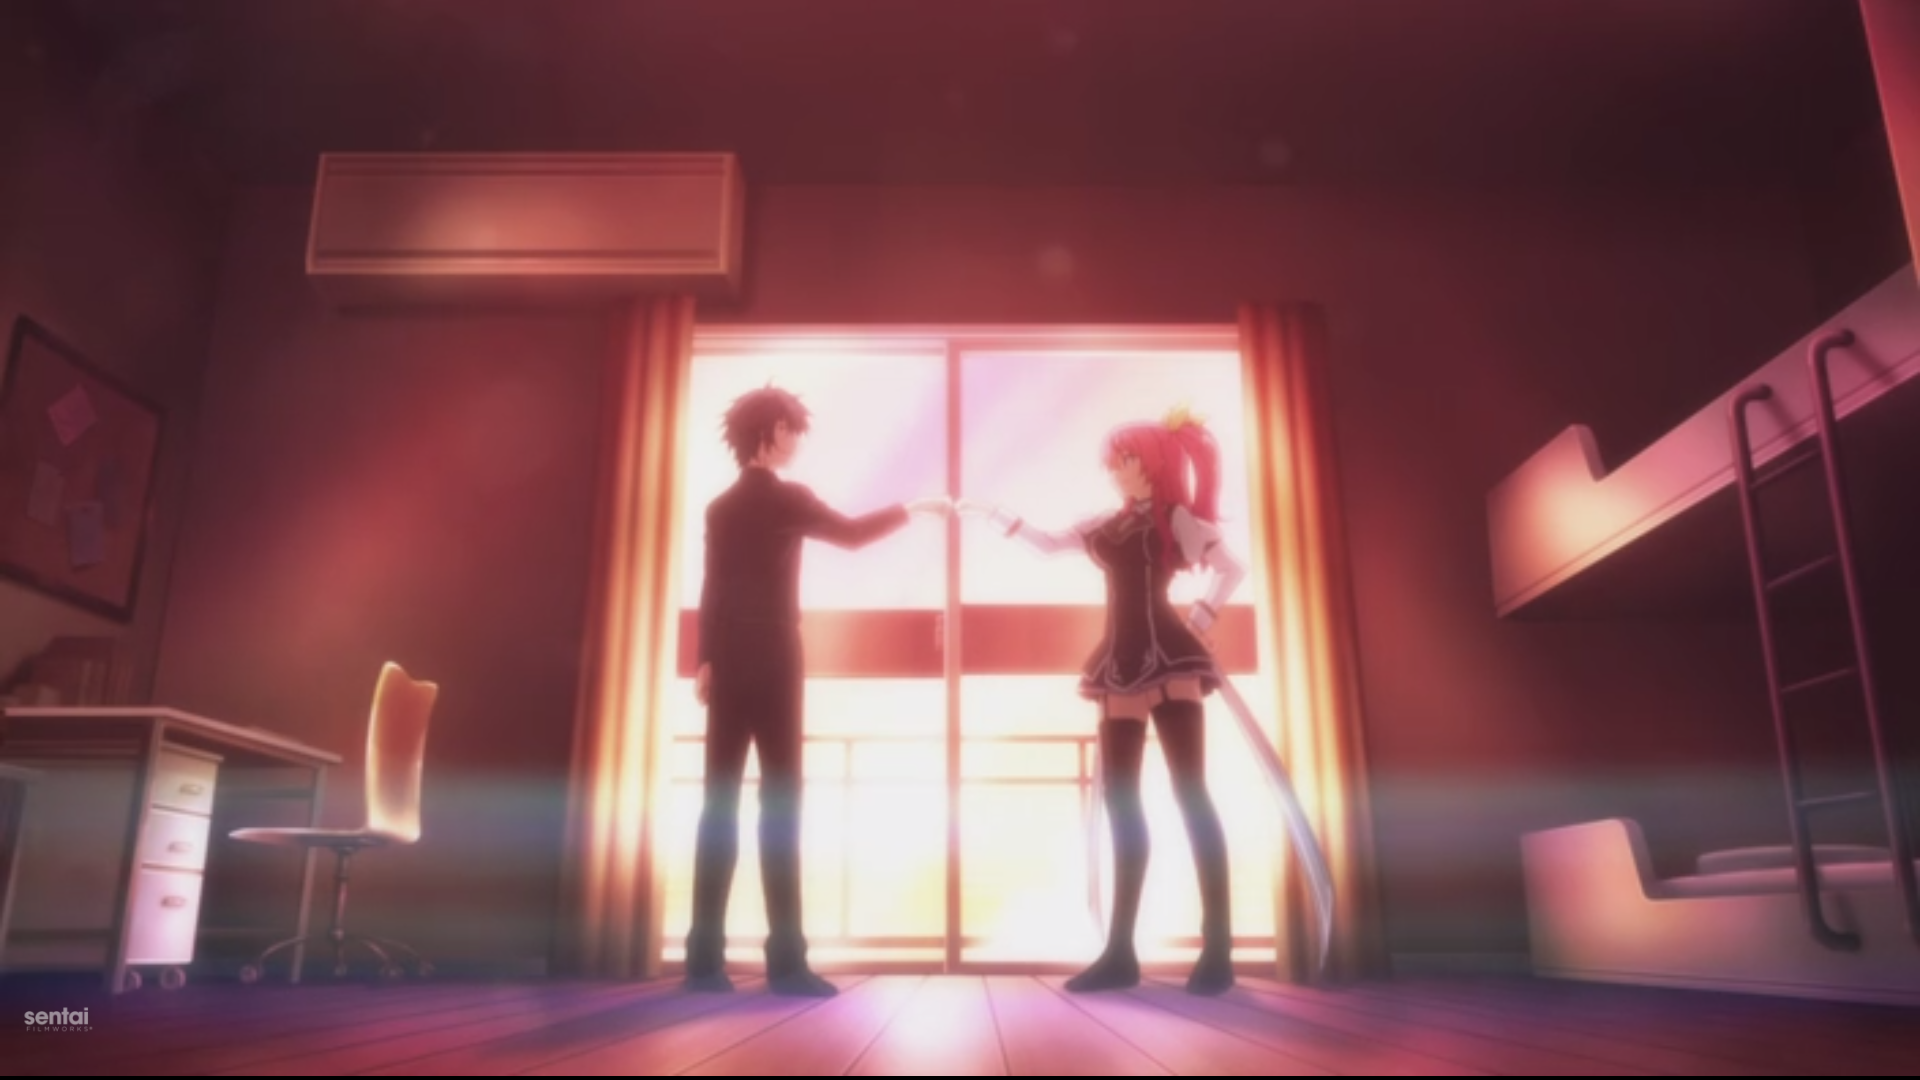 Rakudai Kishi no Cavalry / Episode 1 / Ikki and Stella finally becoming friends after the duel between them